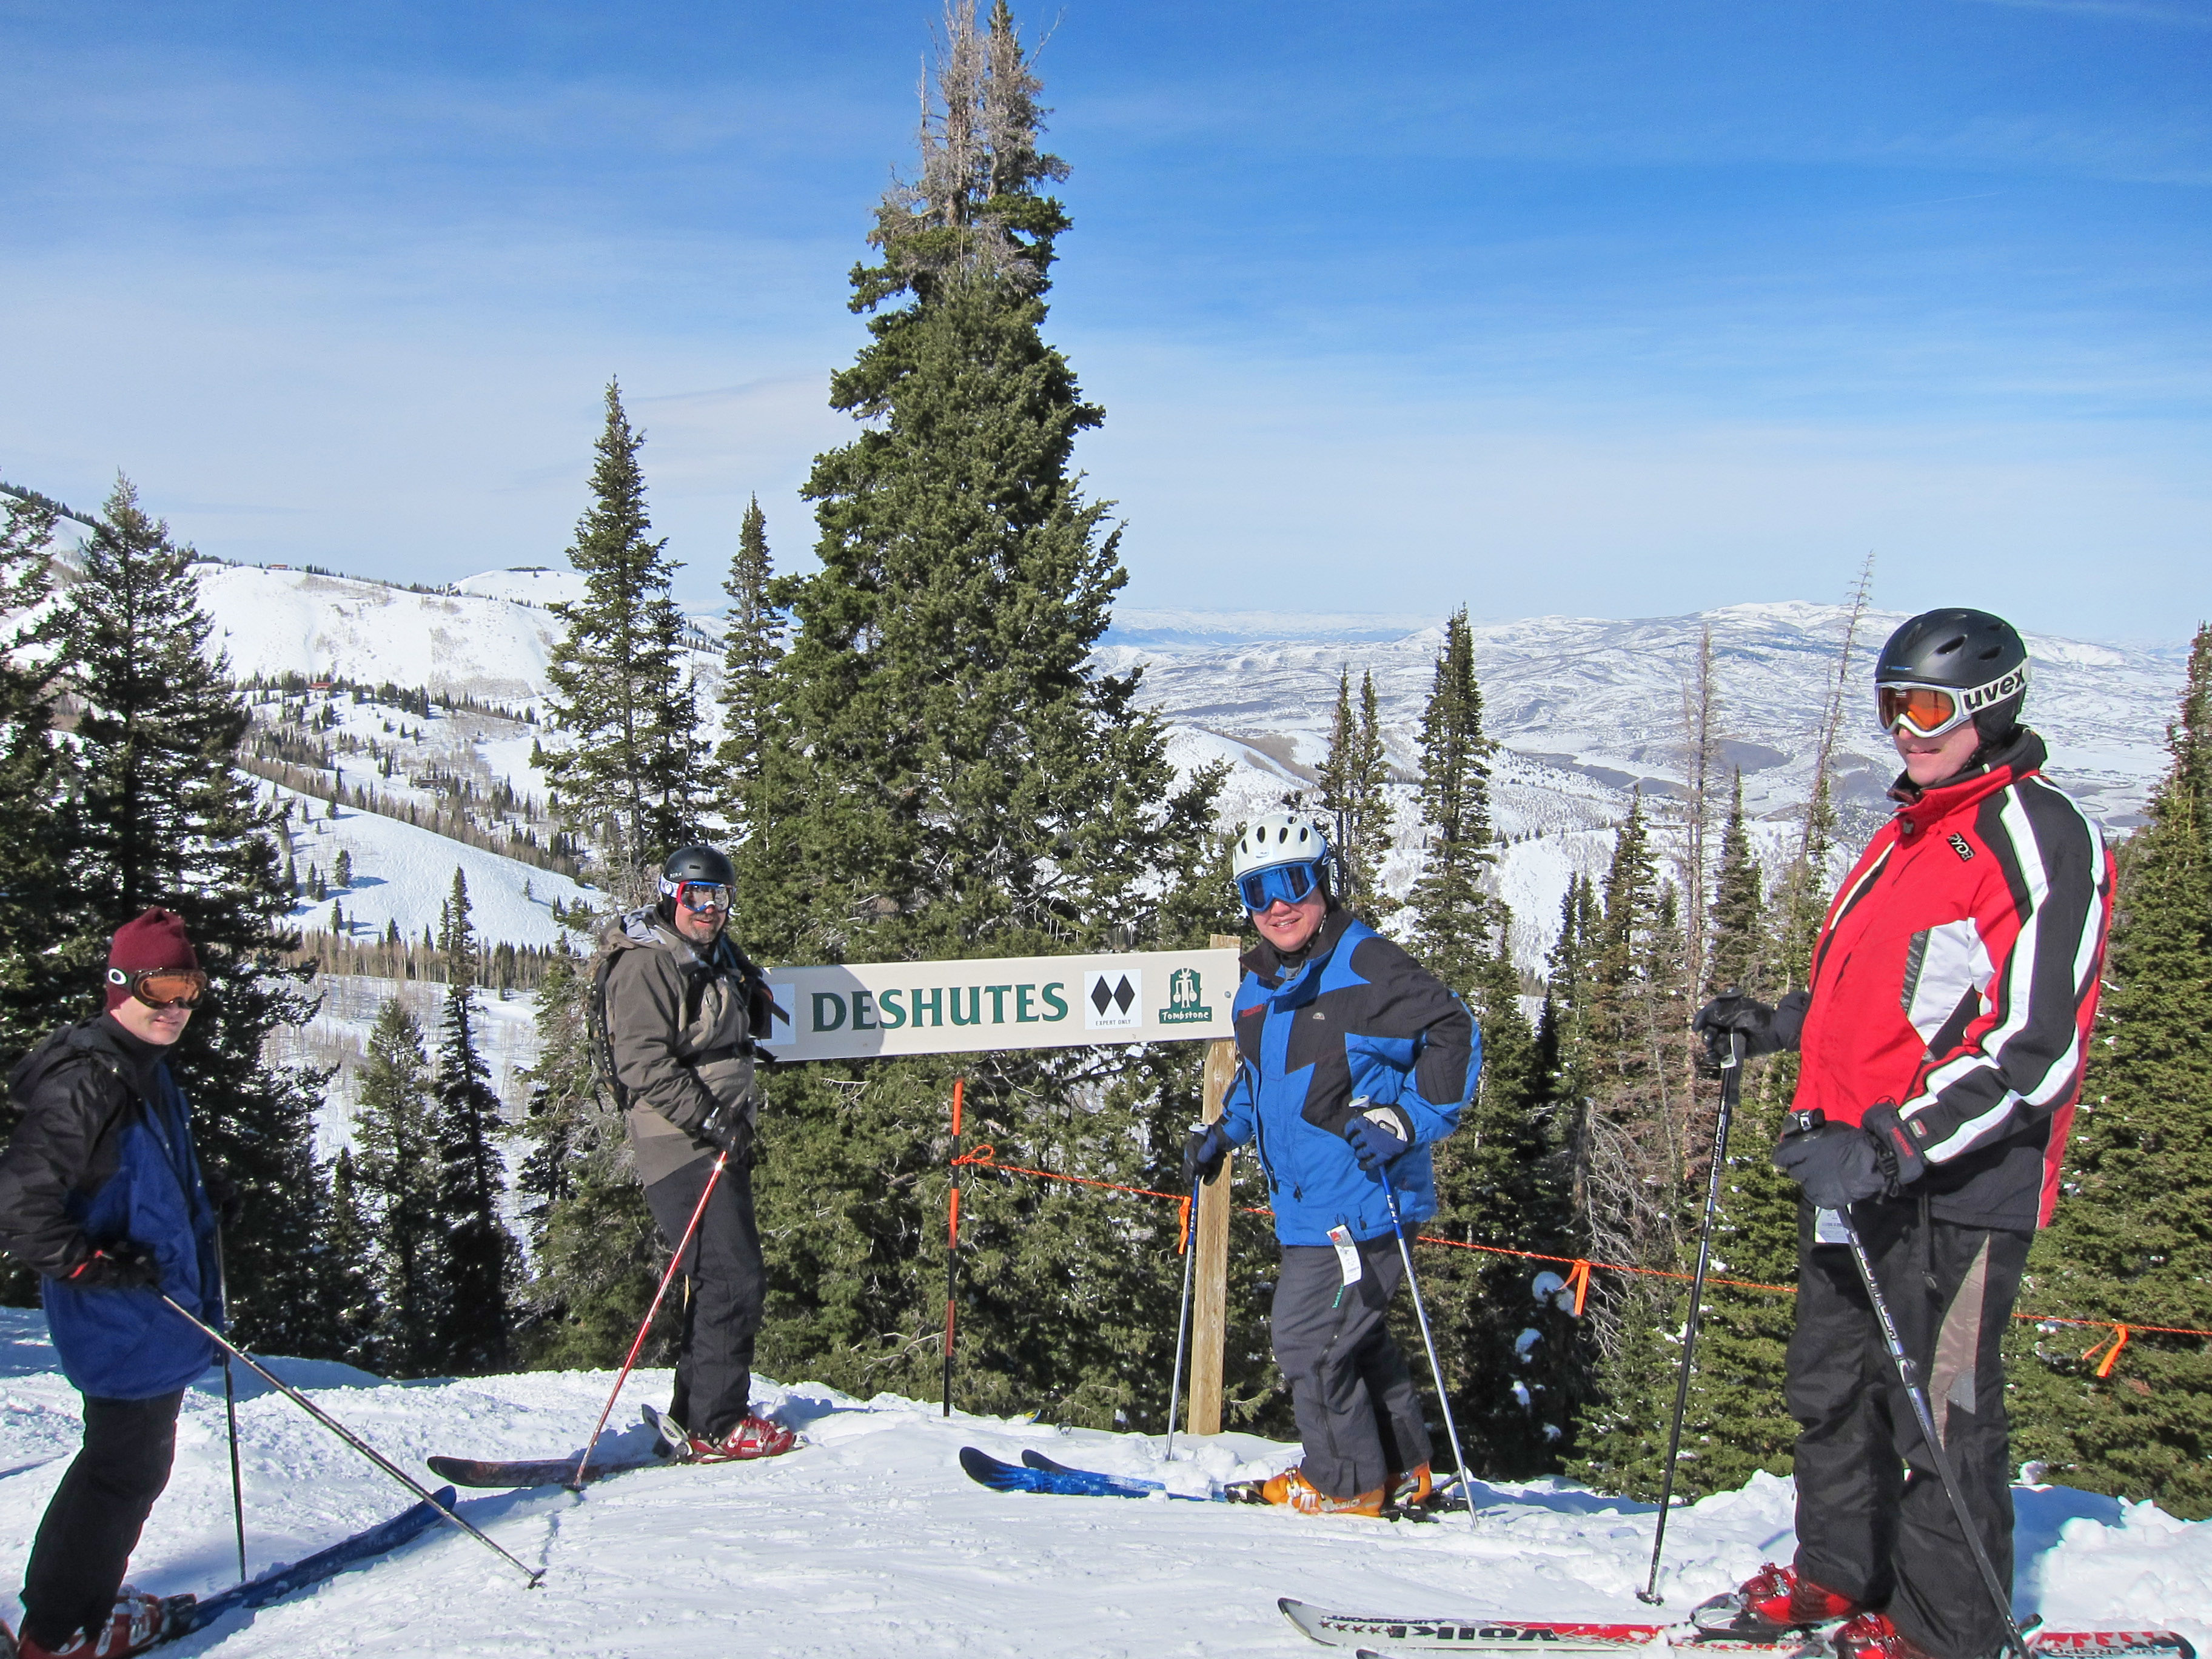 2011 Ski Park City Utah throughout Awesome and Beautiful how to ski double black diamonds intended for Inspire